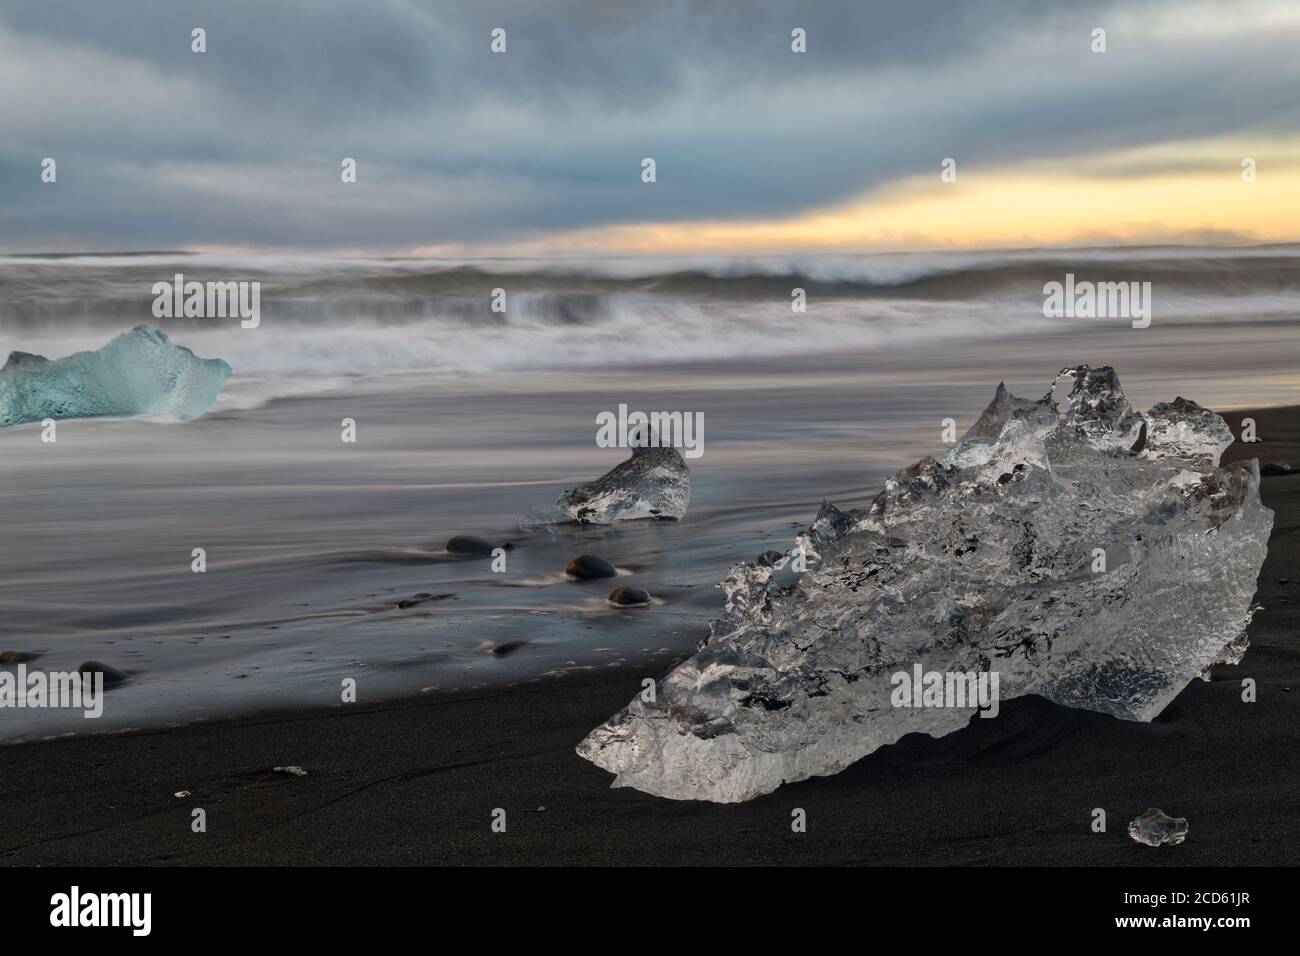 Landscape with ice piece on beach at sunset, Iceland Stock Photo